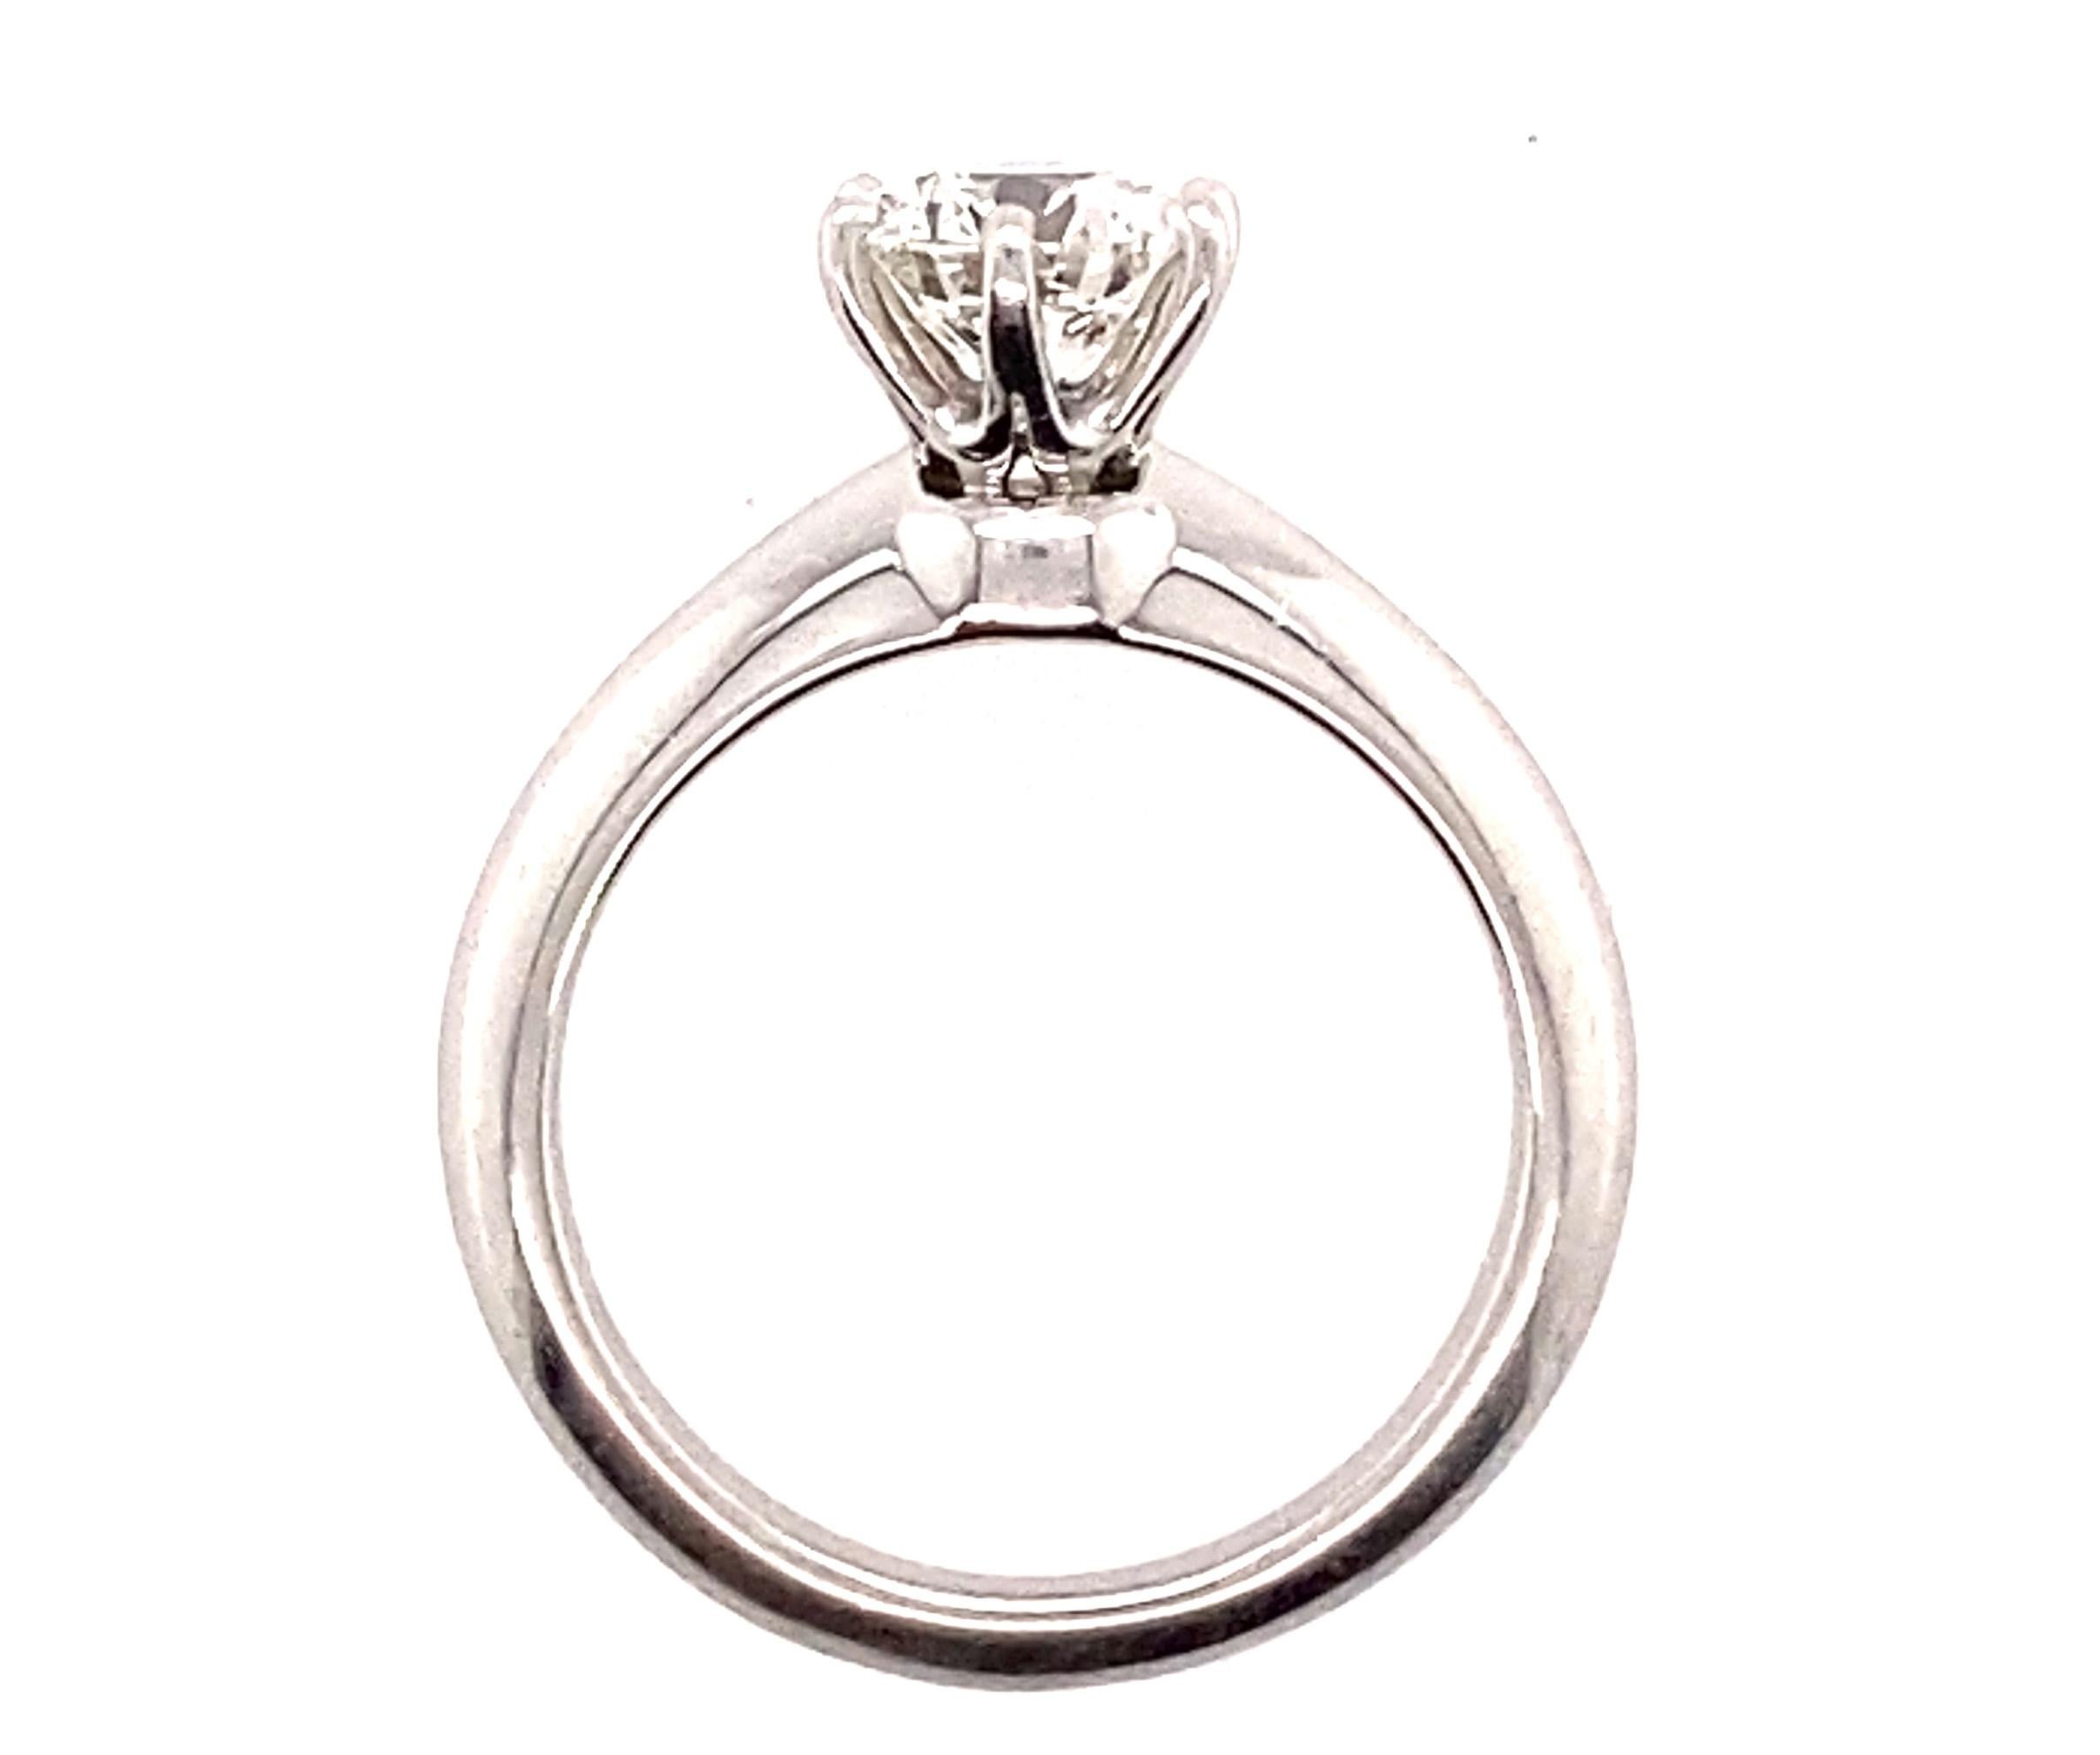 Tiffany & Co Solitaire Diamond Platinum Engagement Ring 1.10ct H-VS2 



Featuring a Stunning Tiffany Certified 1.10ct H-VS2 Genuine Natural Round Brilliant Cut Diamond

MSRP $16,790.00 Tax Included

This Ring Has it All

Great Size, Super Hard to